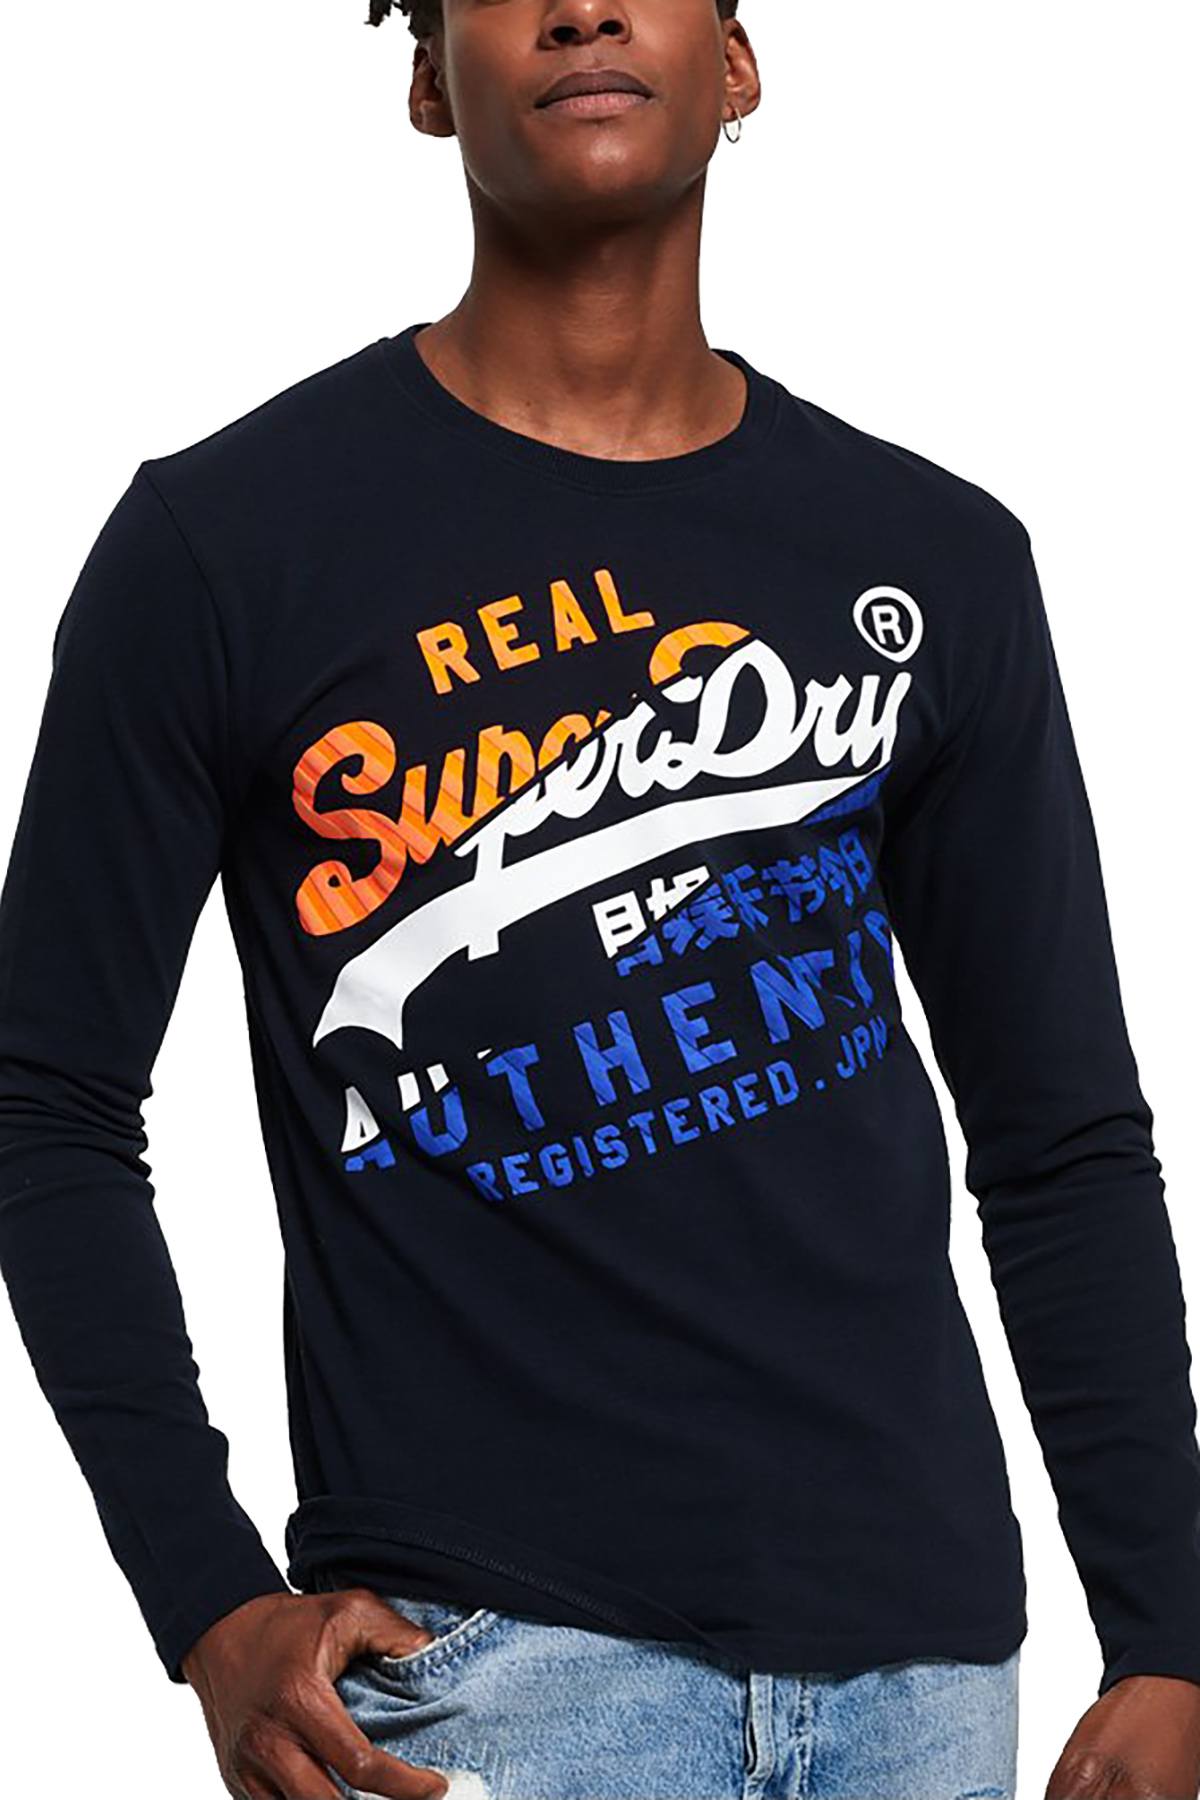 SuperDry Eclipse-Navy T-Shirt Long-Sleeve XL – Vintage Authentic CheapUndies